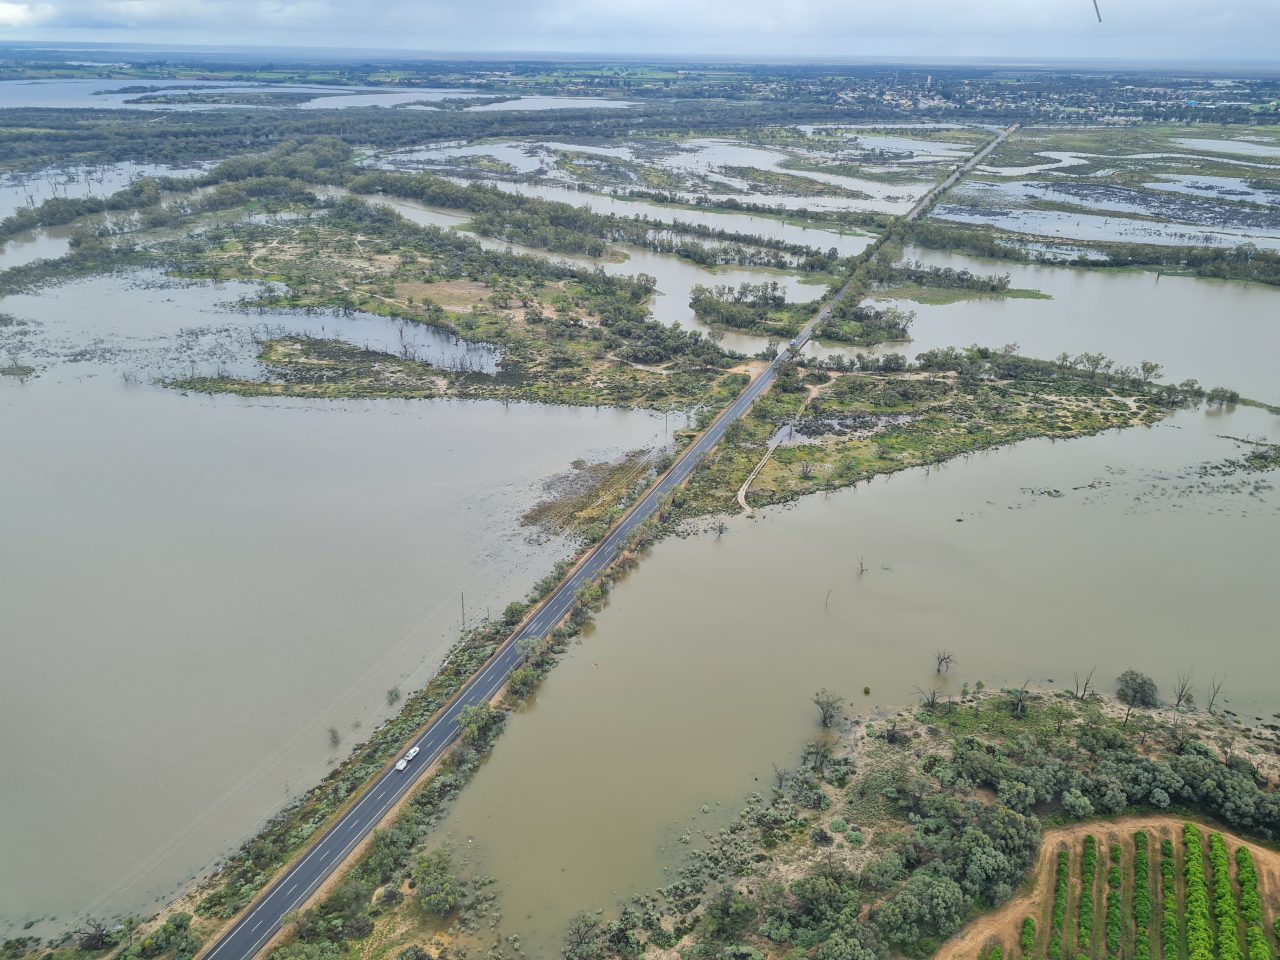 Aerial photo of floodwaters surrounding a long straight stretch of road that is just above the water level and leading toward a town in the distance.